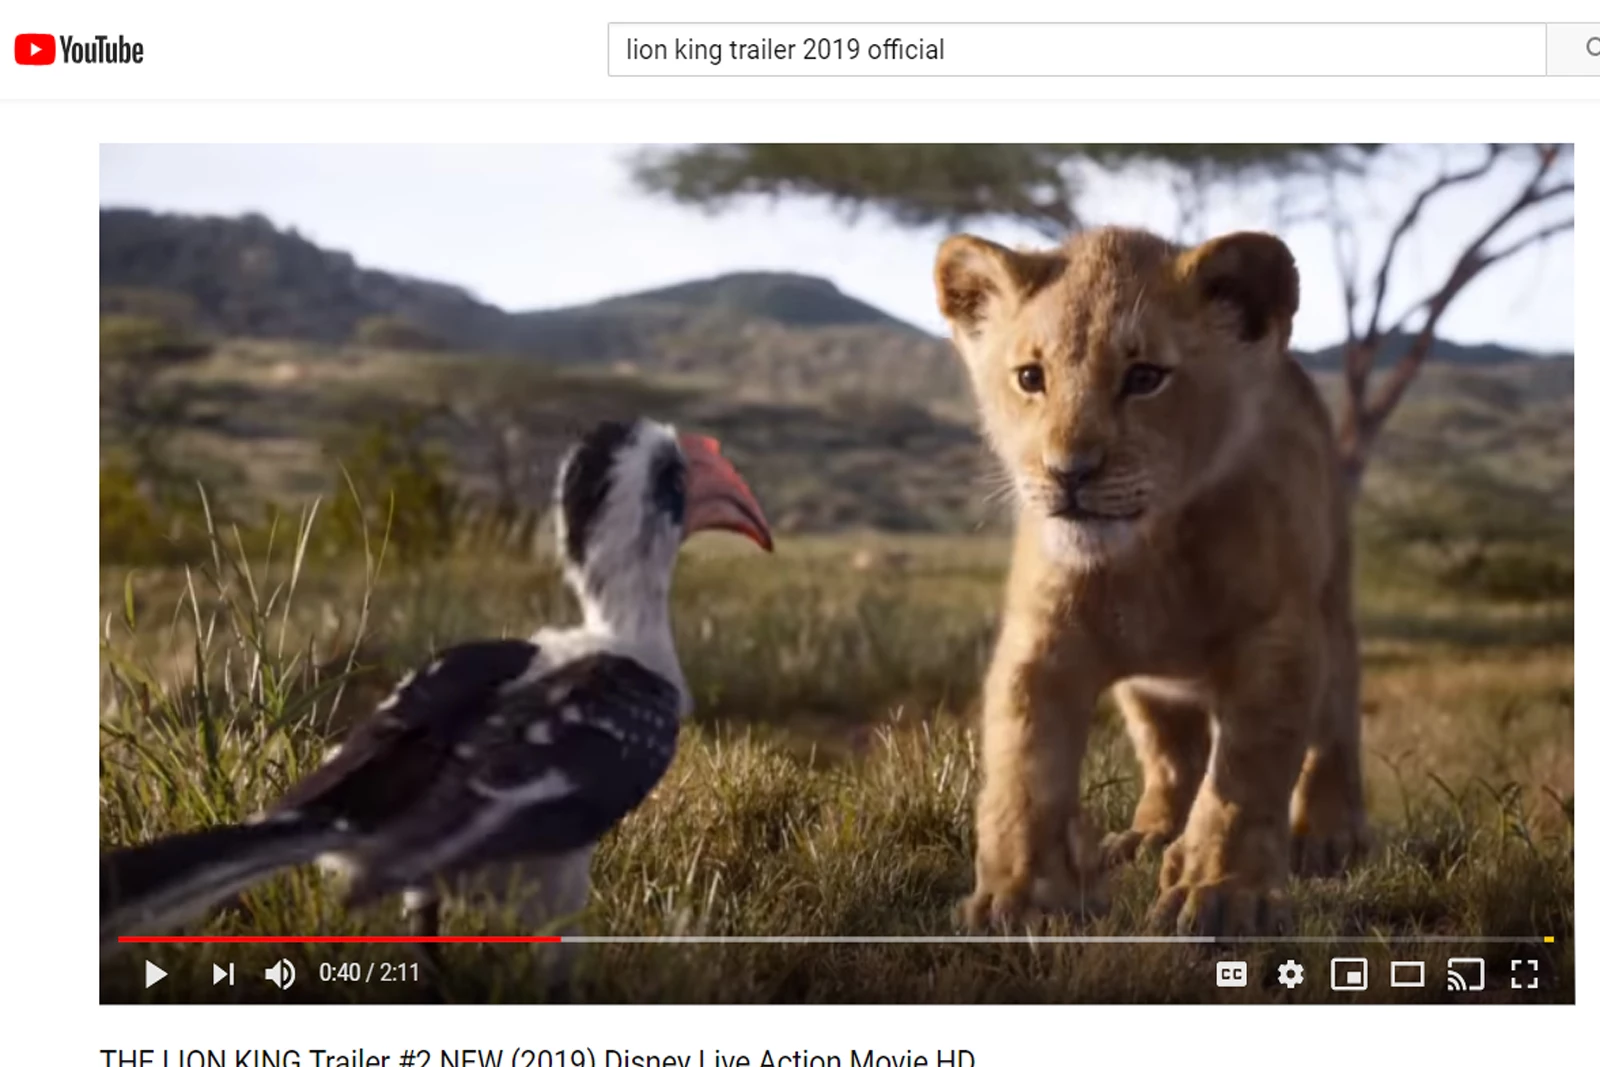 download the new lion king